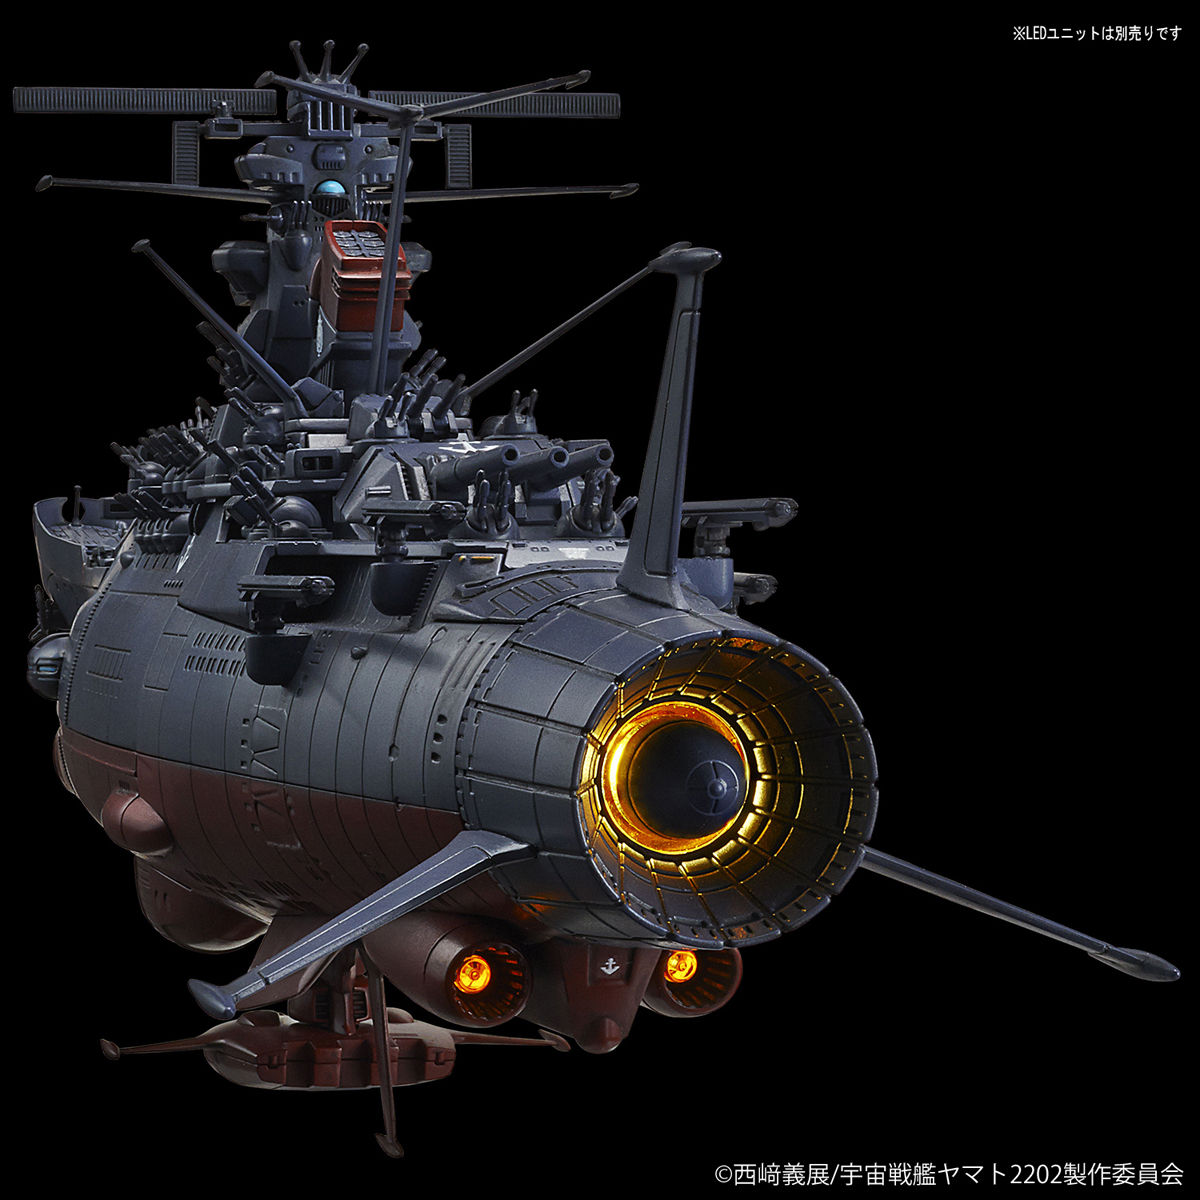 Bandai 4573102567635 1/1000 Space Battleship Yamato 2202 The Final Battle Toy for sale online 